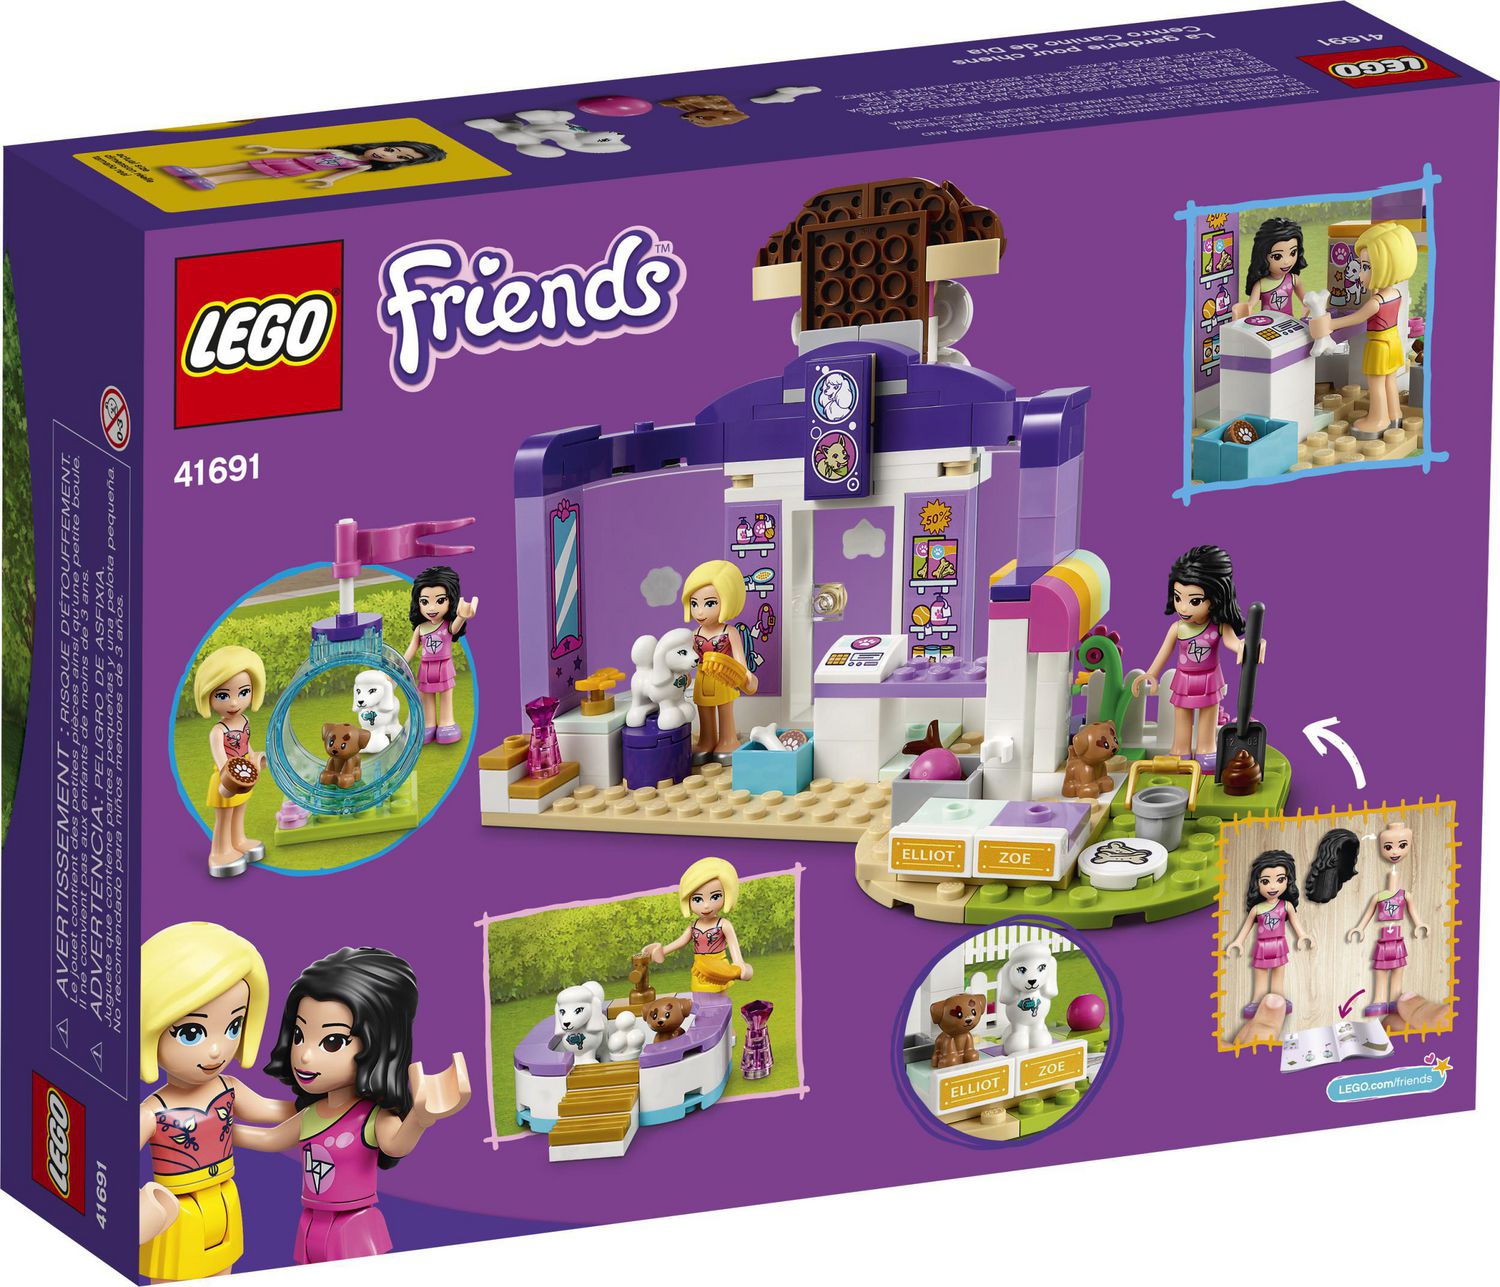 221 Pieces Comes with 2 Mini-Dolls and 2 Toy Dog Figures New 2021 LEGO Friends Doggy Day Care 41691 Building Kit; Birthday Gift for Kids 